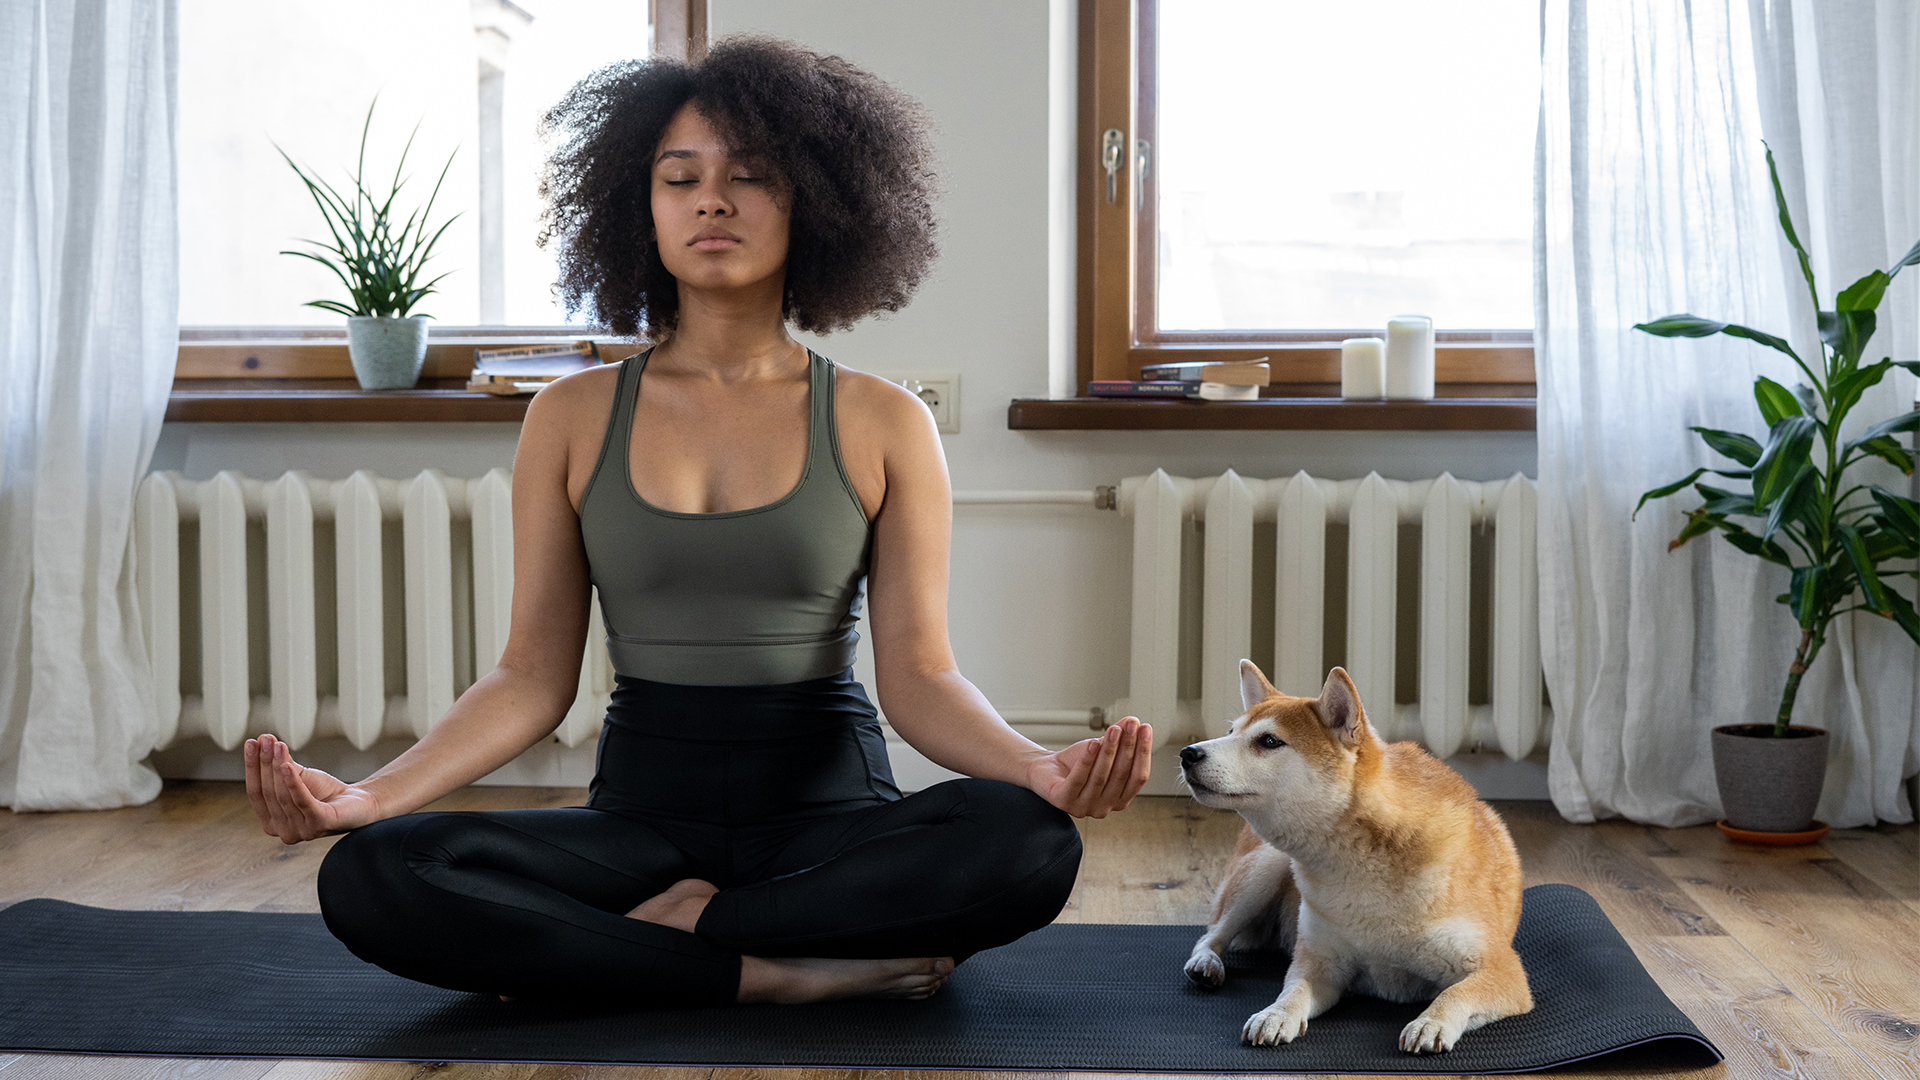 A person meditating next to a dog on a yoga mat